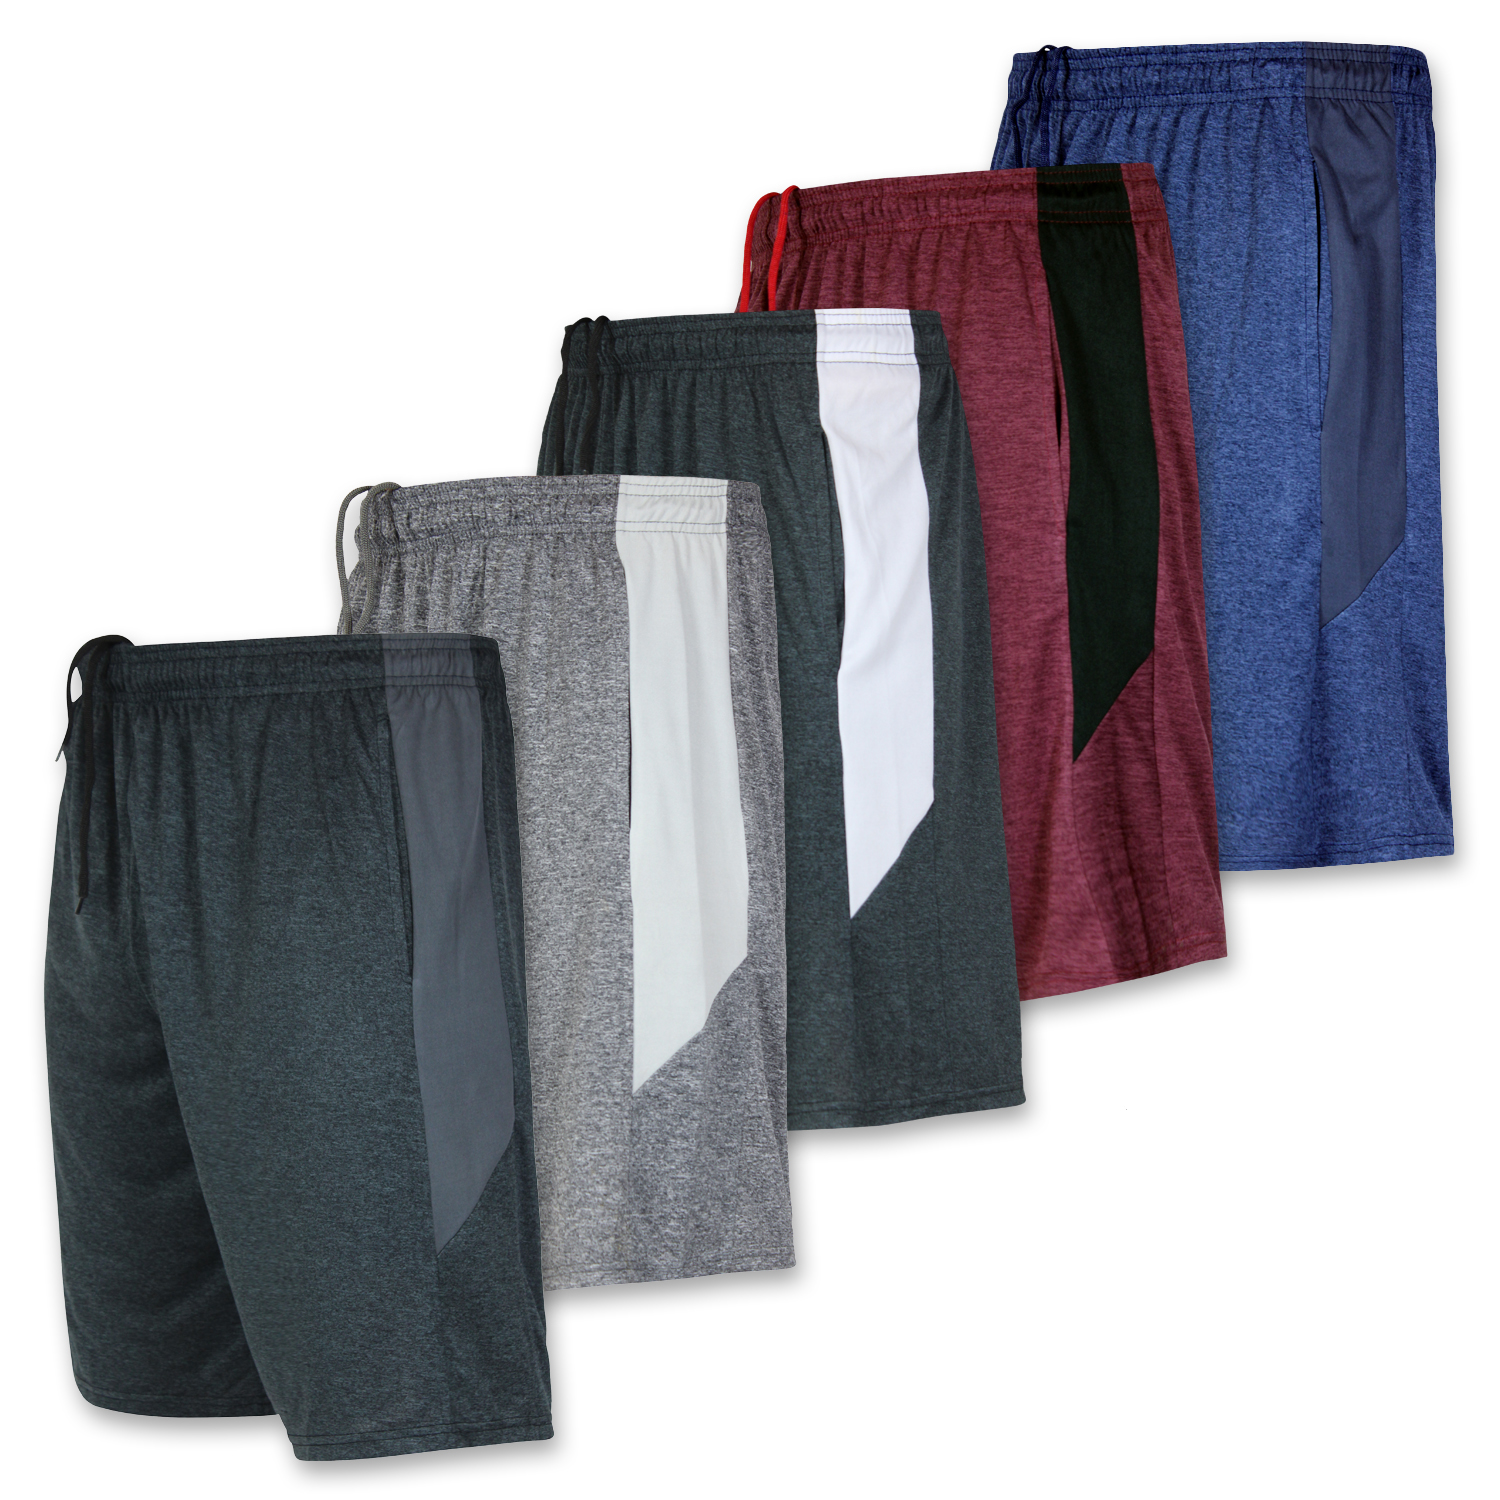 Real Essentials Youth Dry-Fit Athletic 5-Pack Gym Shorts with Pockets, Sizes 5-18 - image 1 of 6